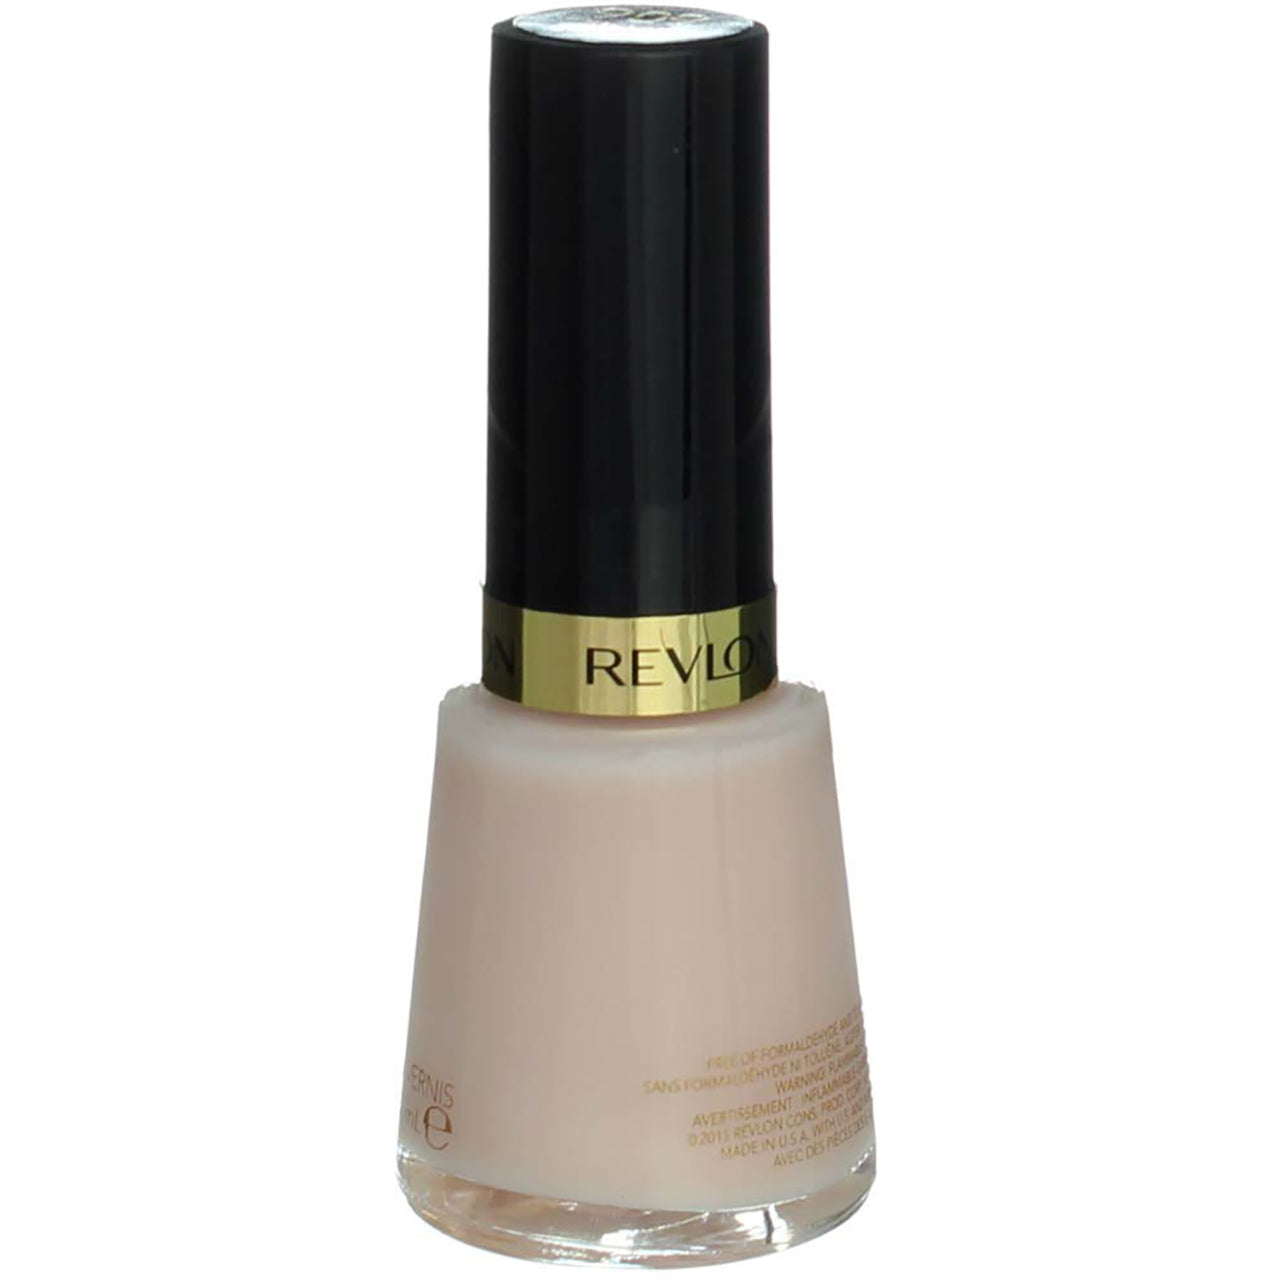 Revlon Parfumerie Nail Lacquer in China Flower Swatch & Review - Cosmetic  Sanctuary